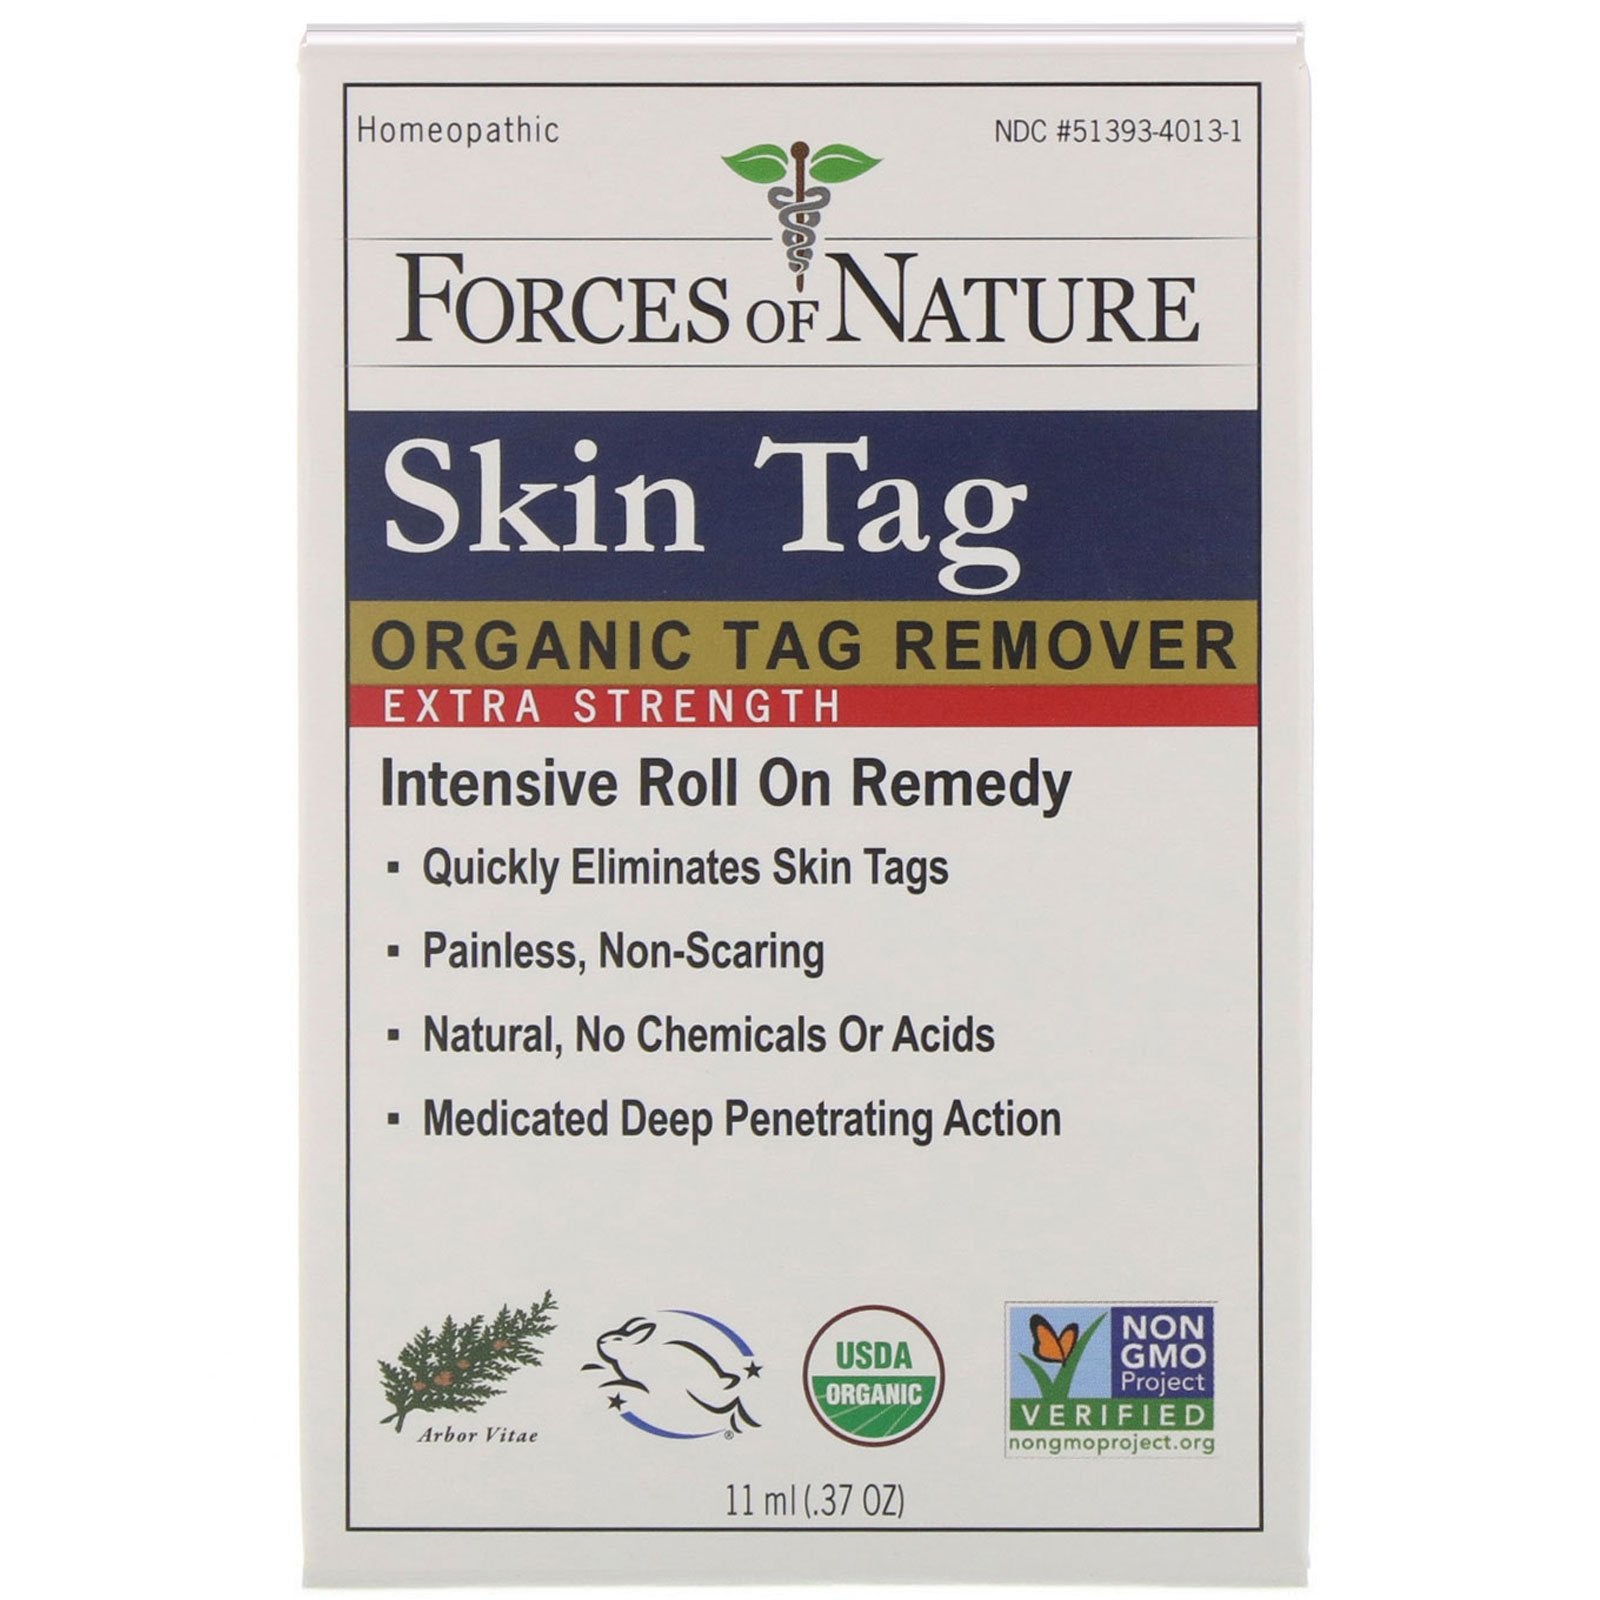 Forces of Nature, Skin Tag, Organic Tag Remover, Extra Strength, 0.37 oz (11 ml)